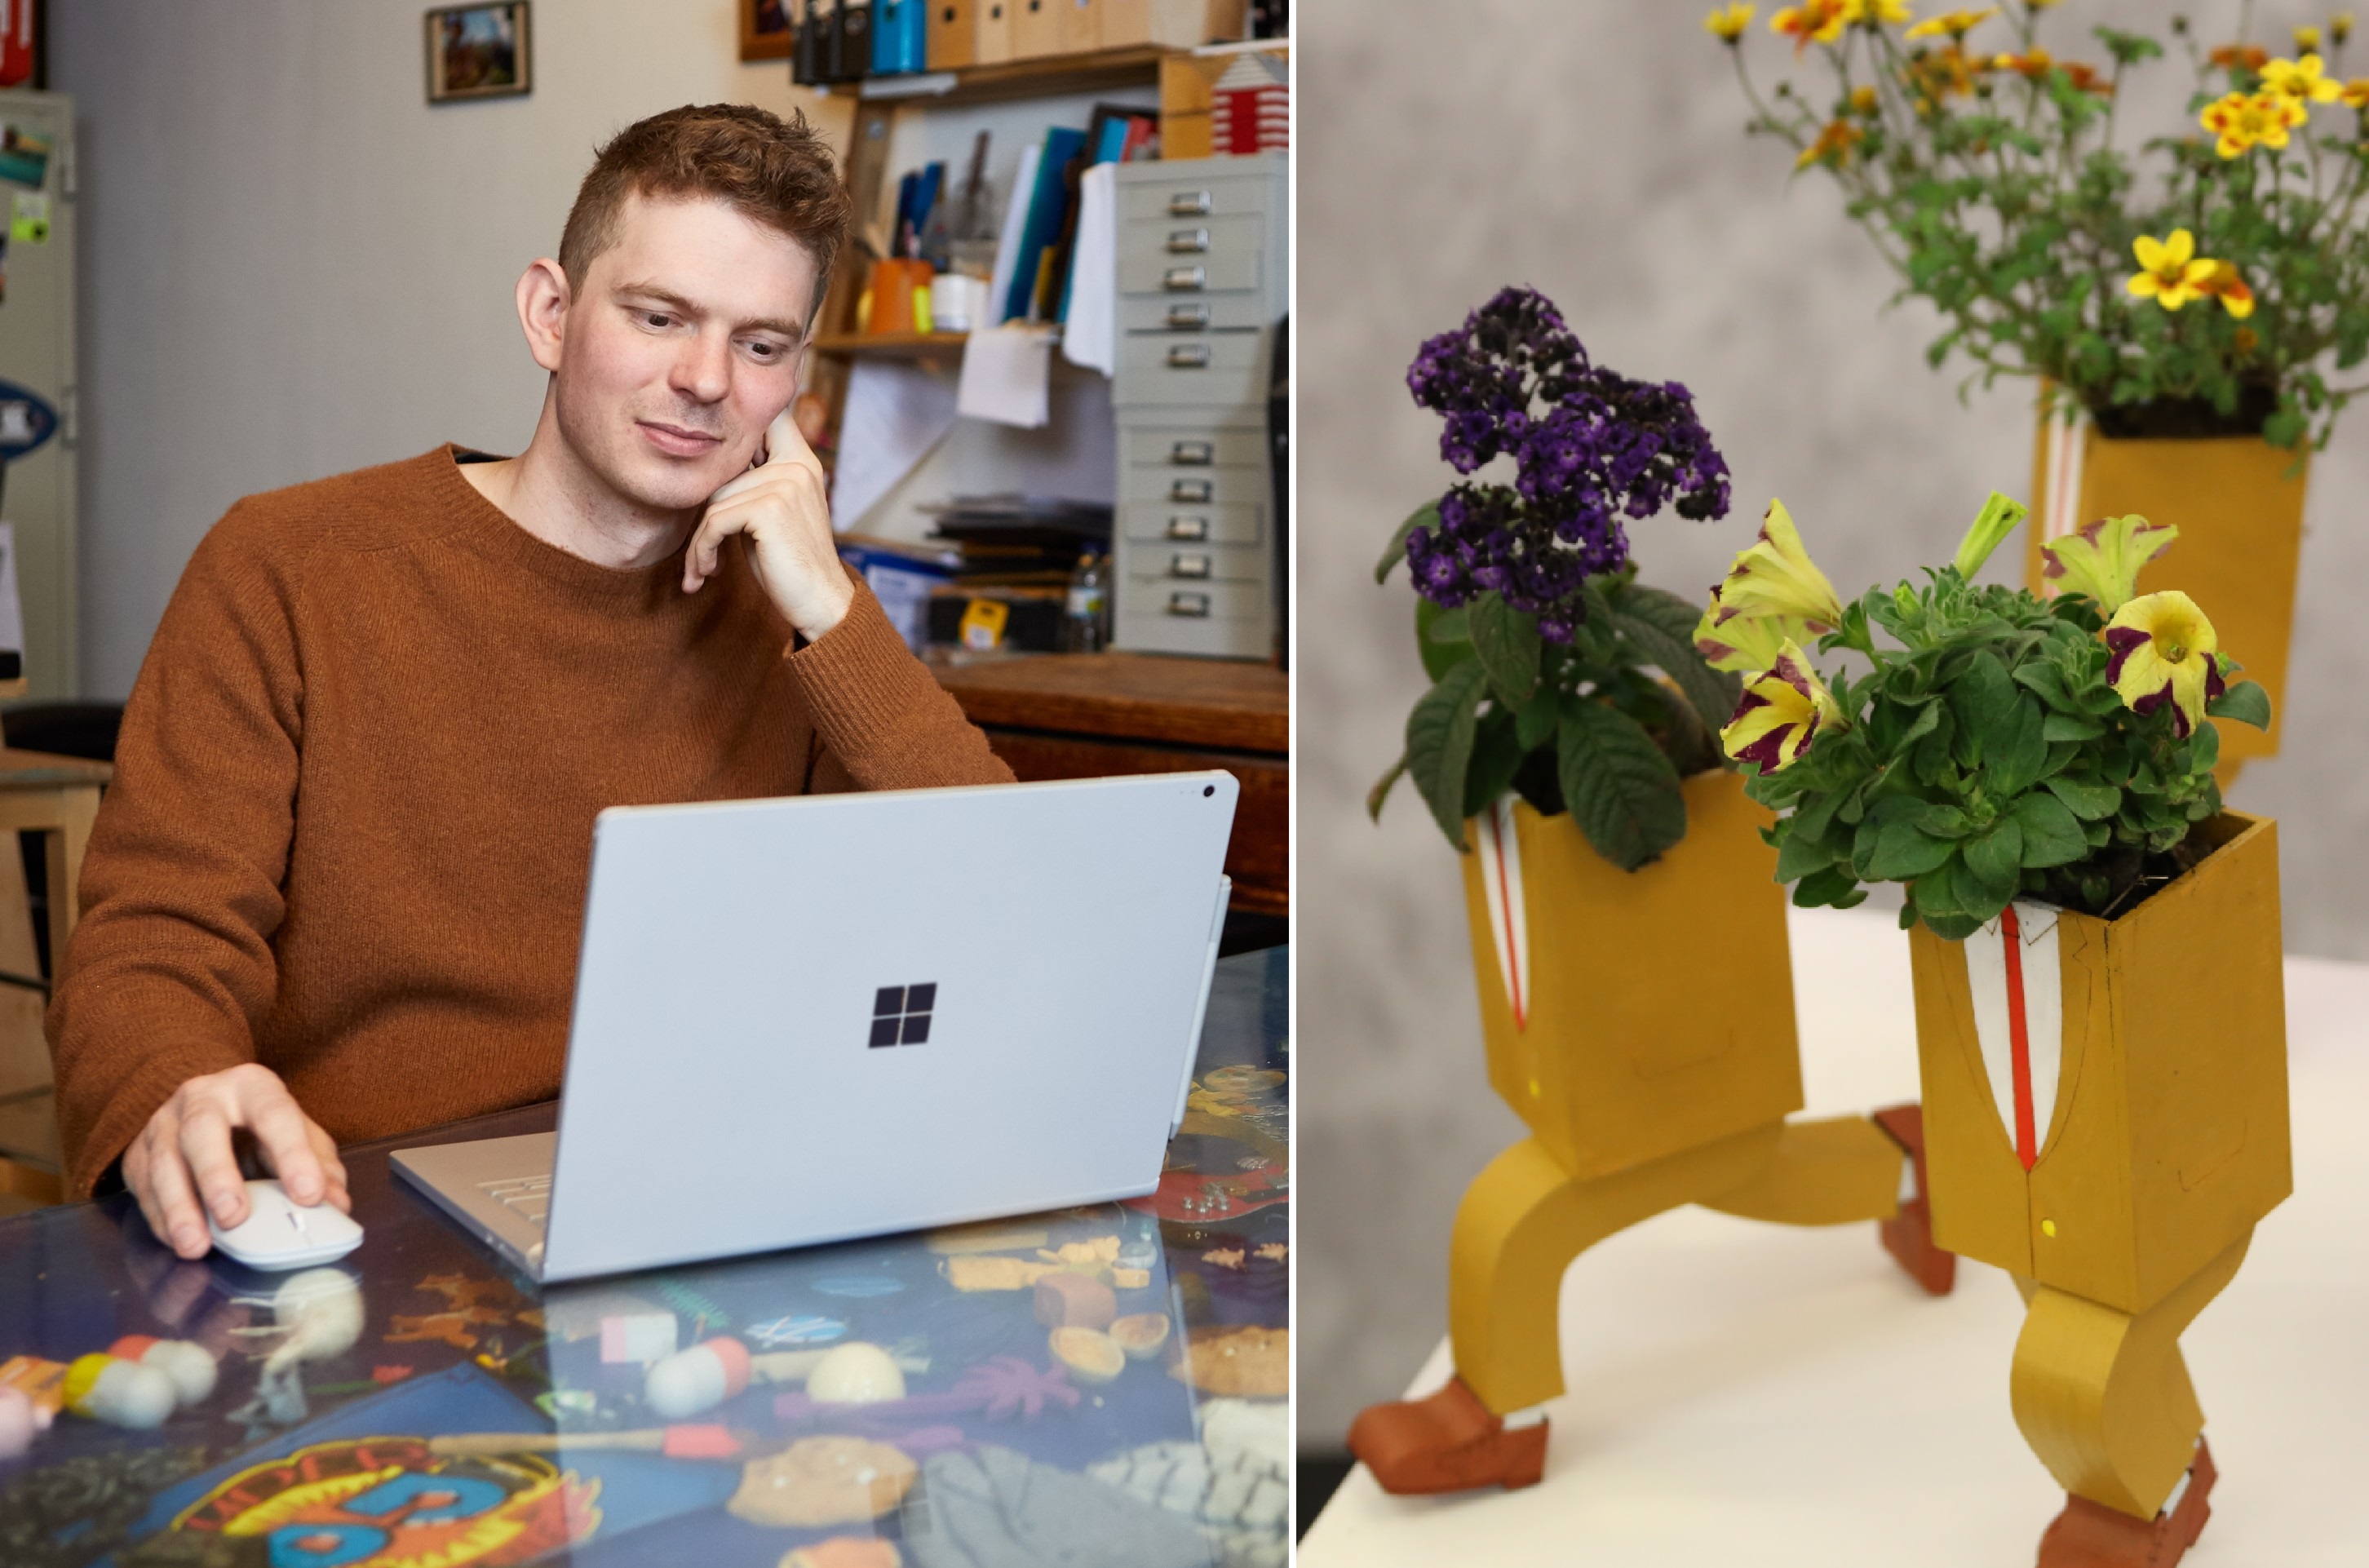 Tom O’Meara, an animator, uses a Surface Book 2 in his studio